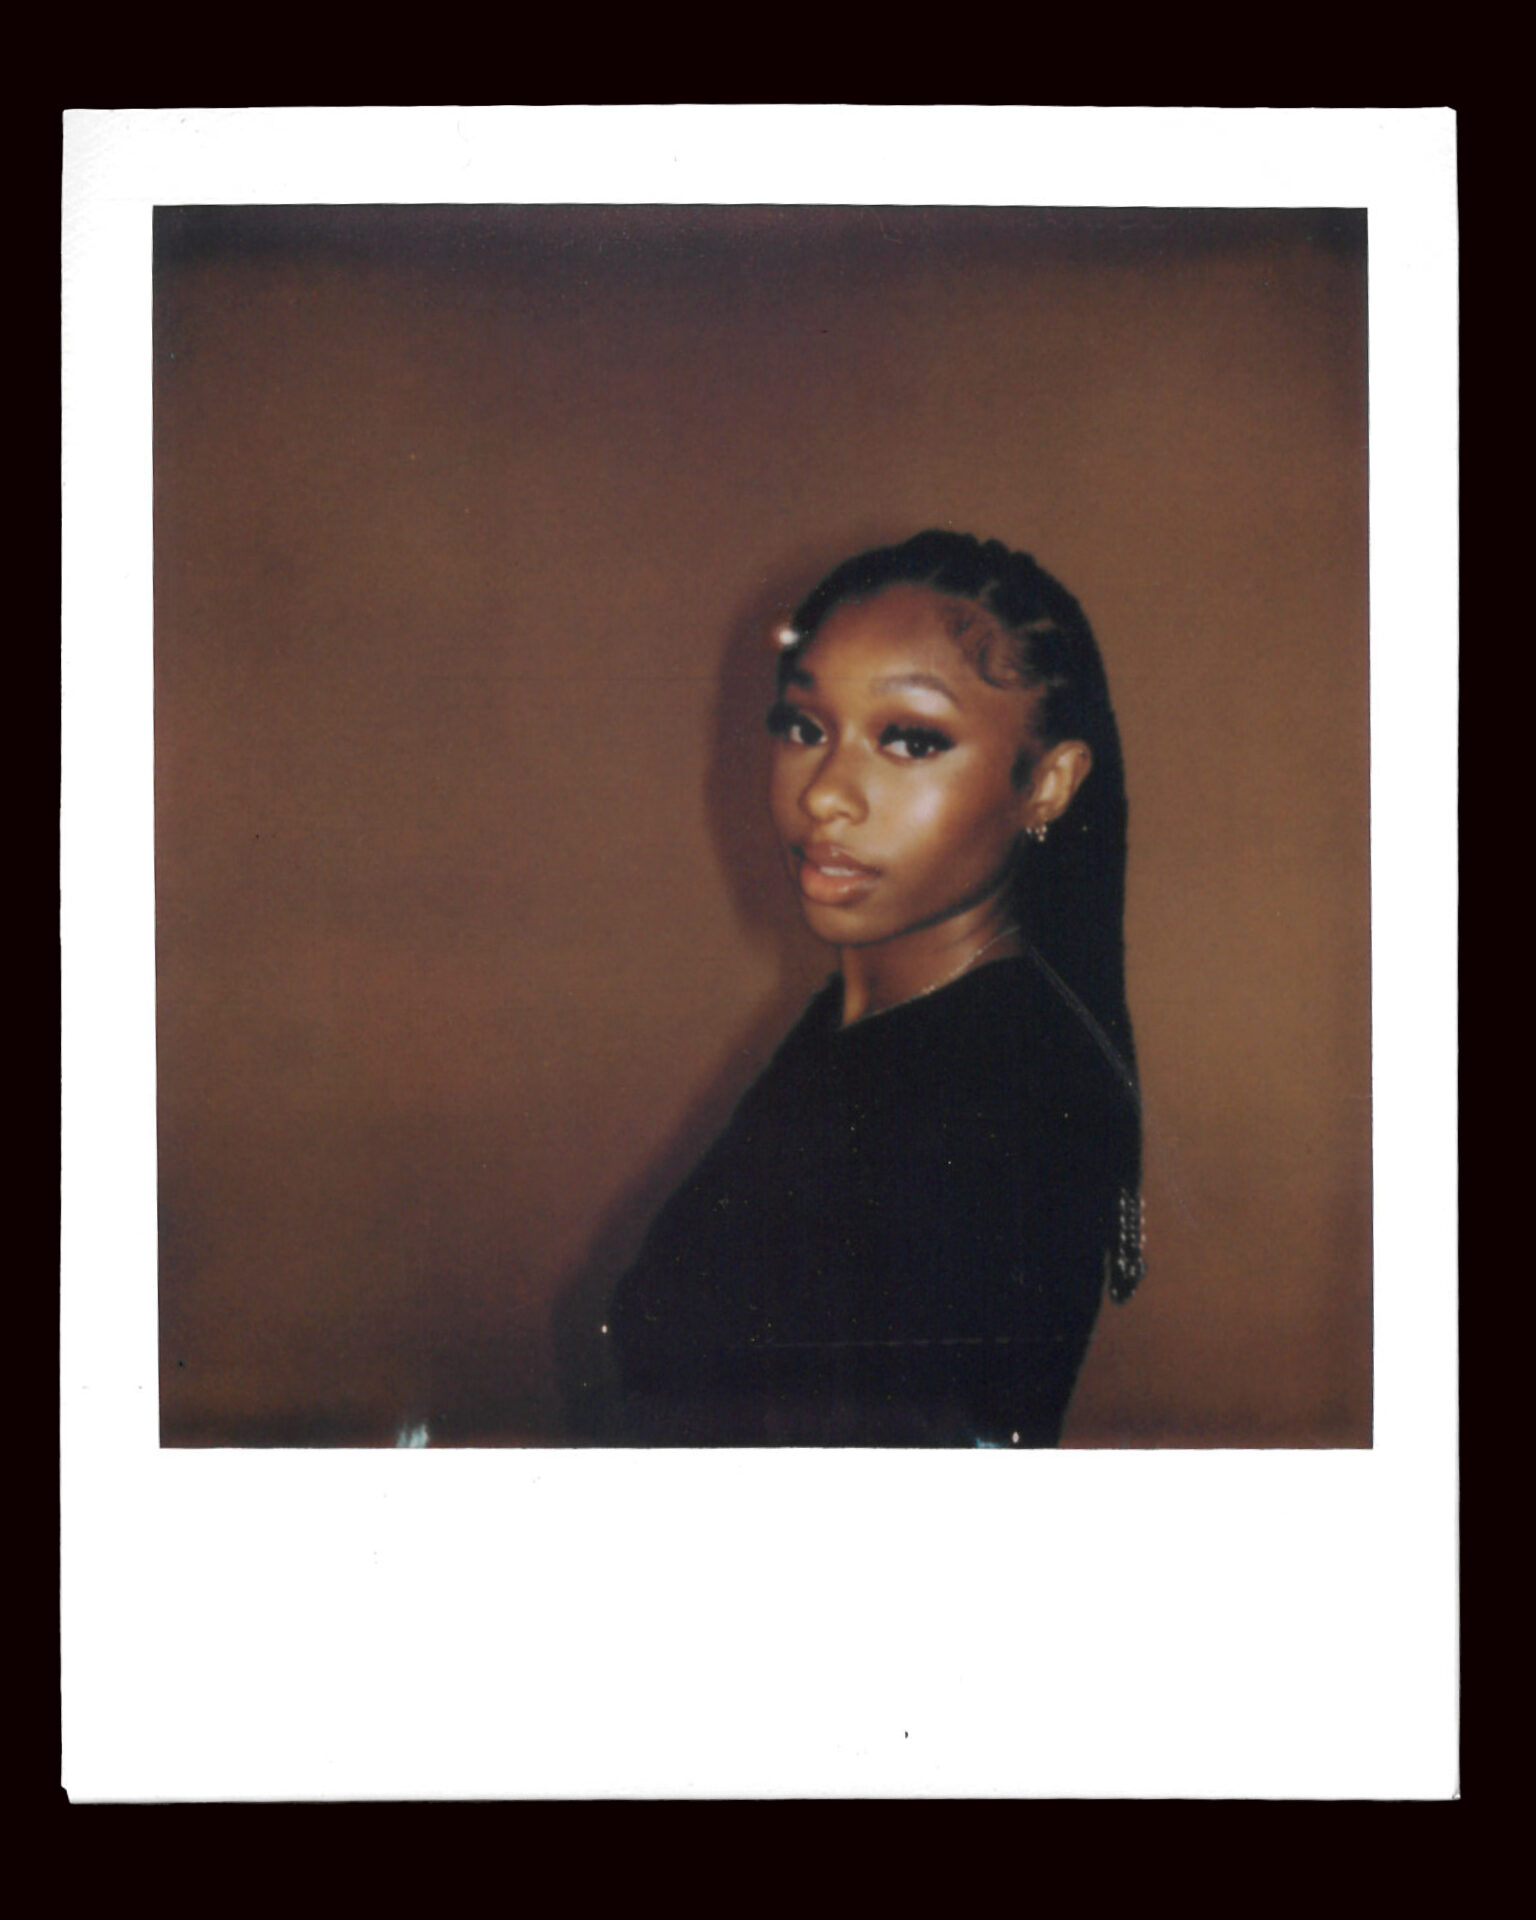 FLO's Renée Downer poses in a black shirt in a side on polaroid picture